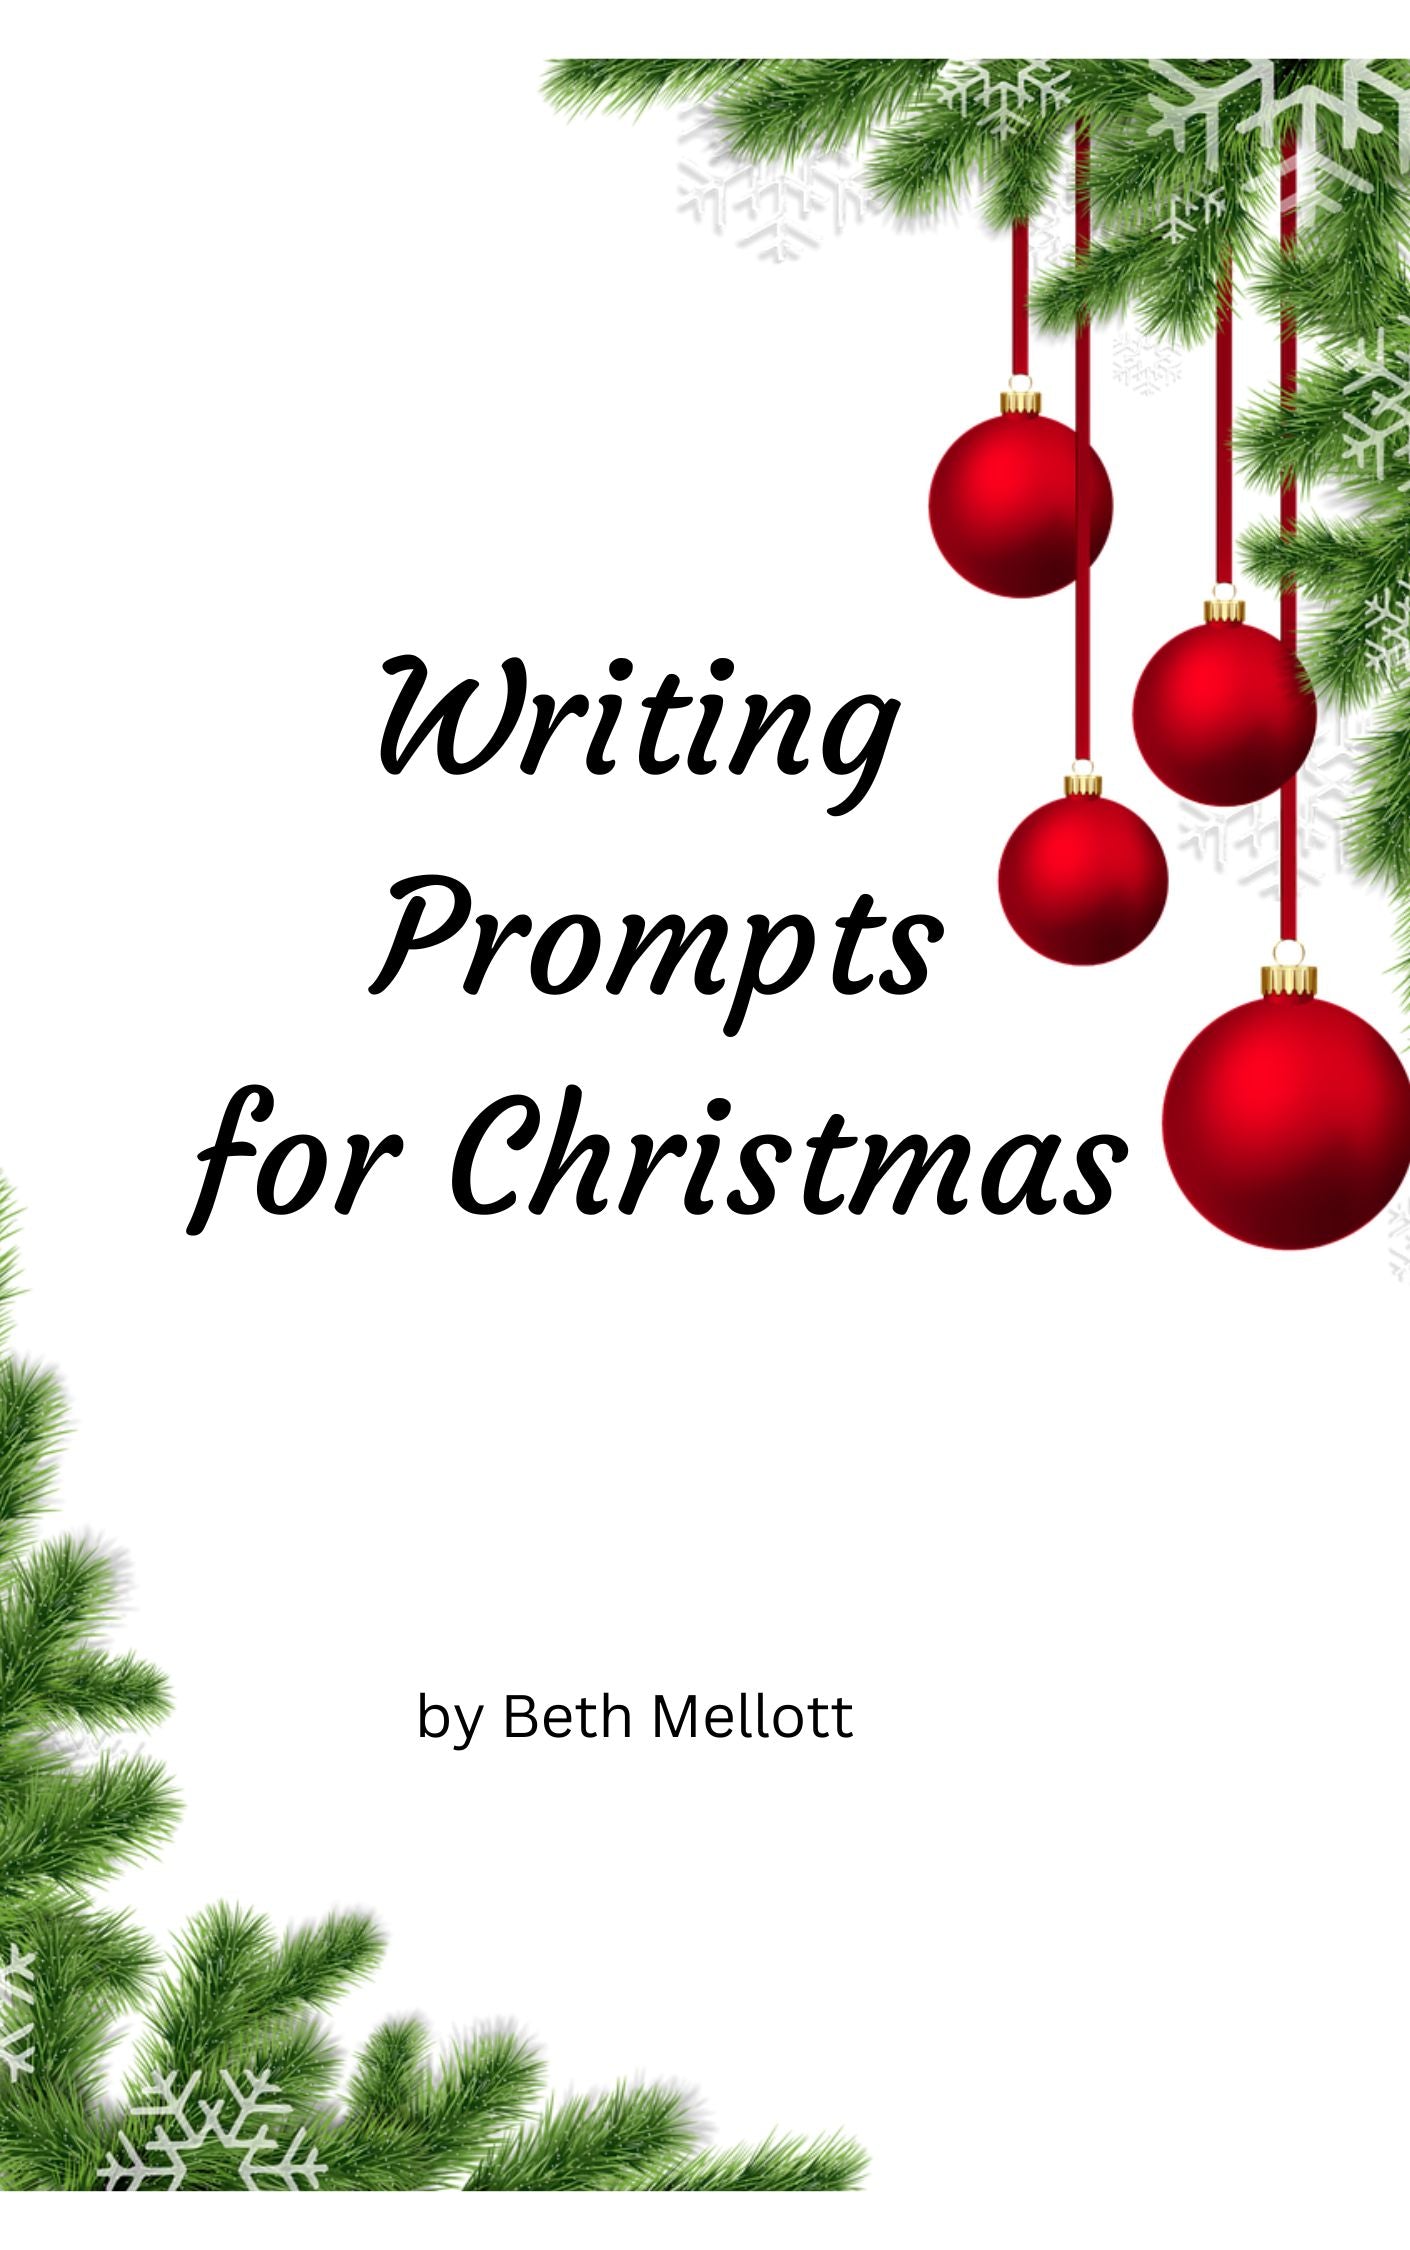 Writing Prompts for Christmas